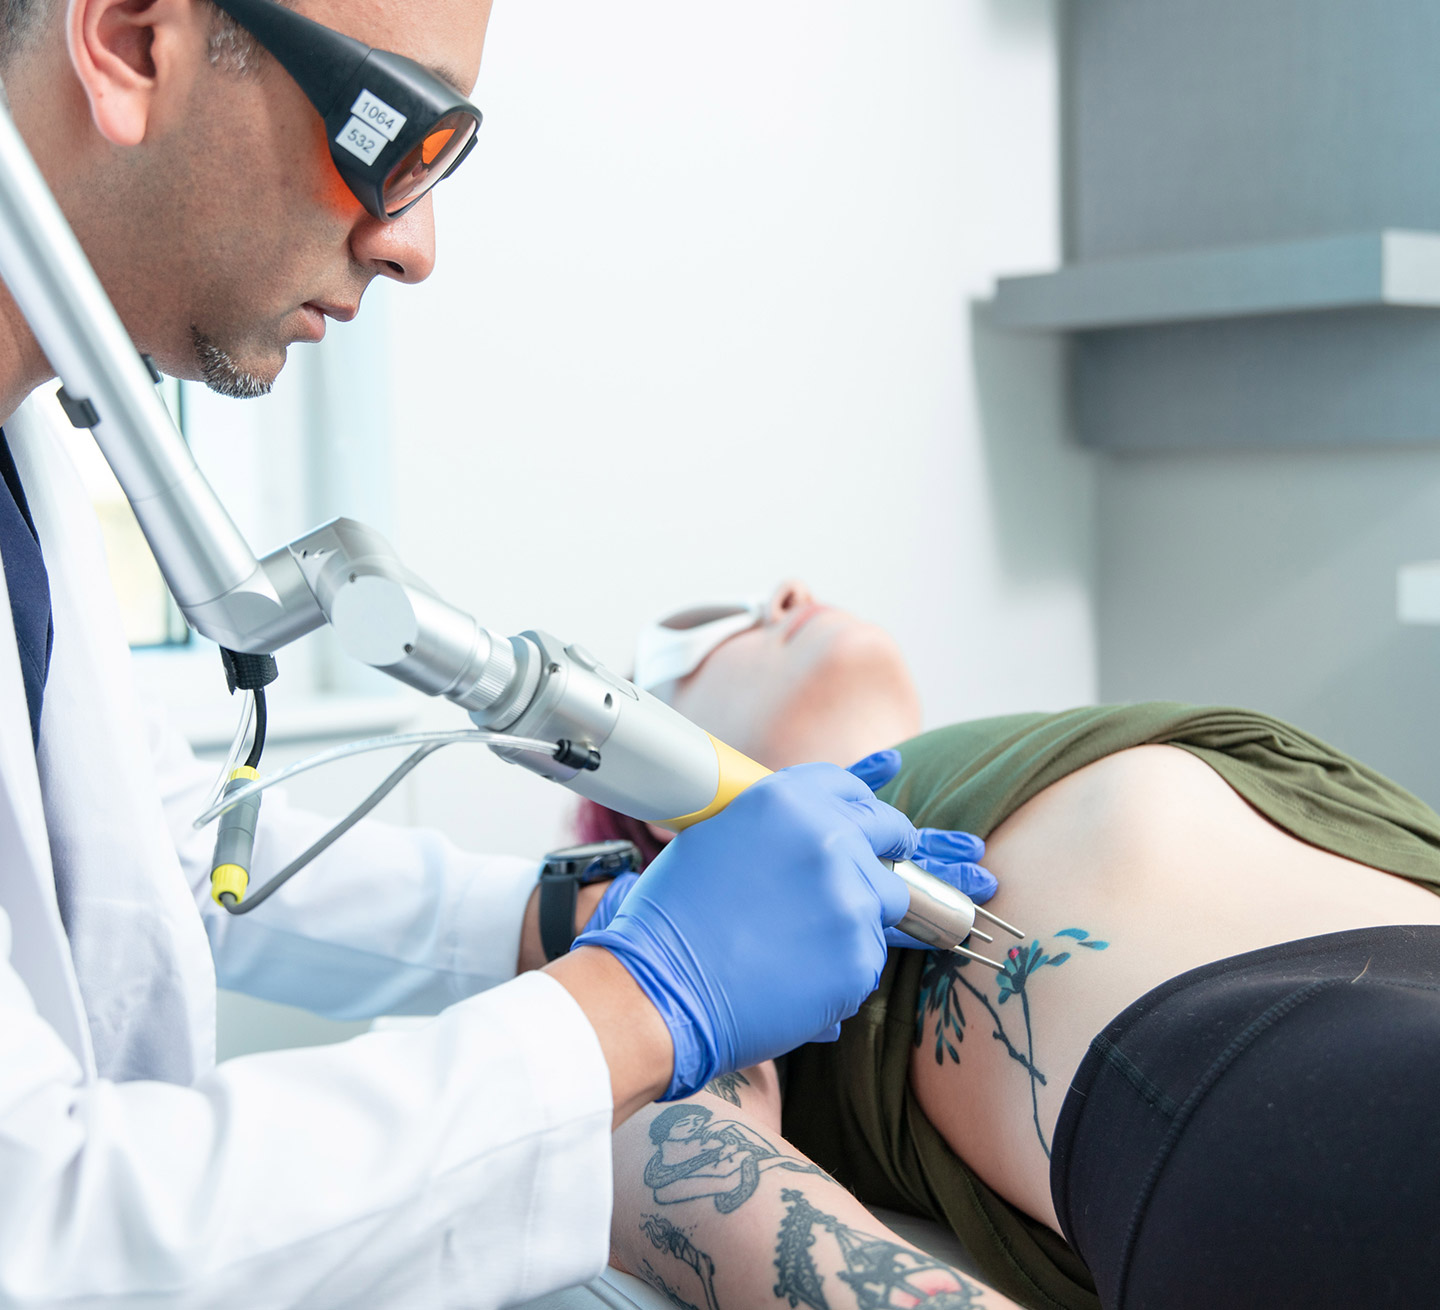 Permanent Tattoo Removal In Gurgaon | Dr. Bk Garg